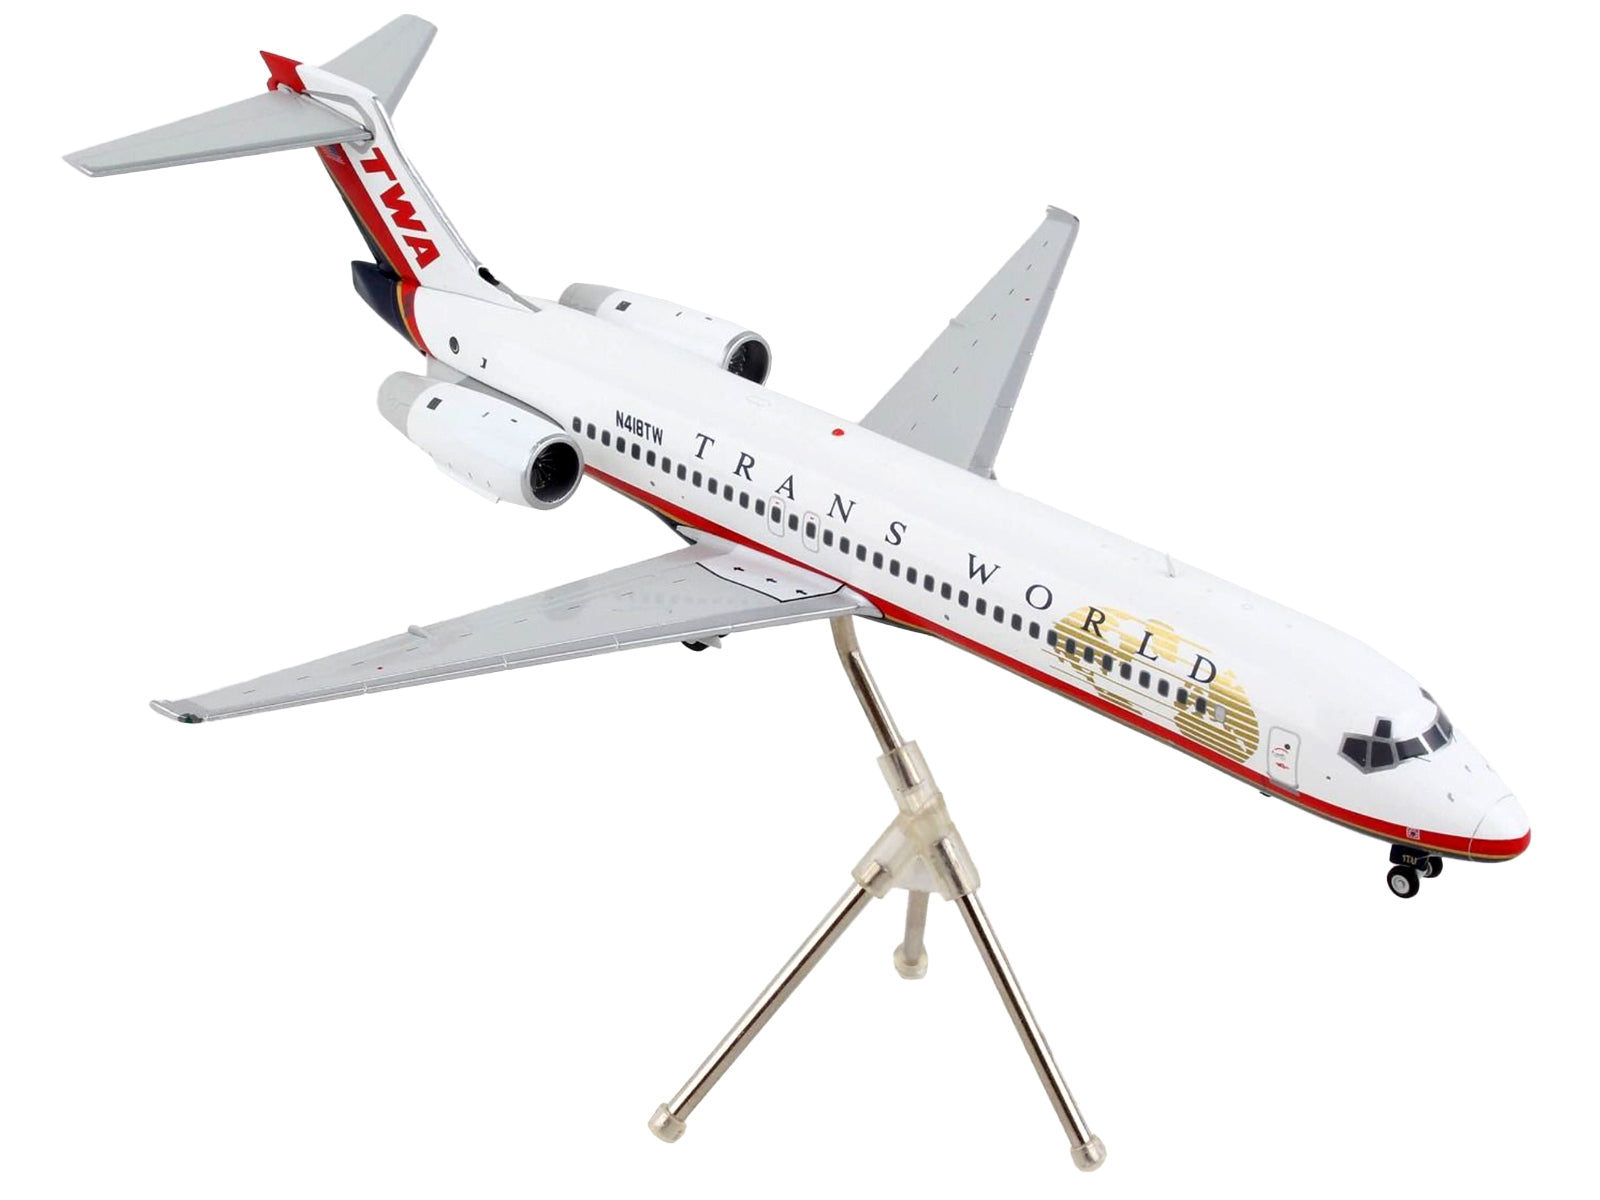 Boeing 717-200 Commercial Aircraft "Trans World Airlines" White with Red Stripes "Gemini 200" Series 1/200 Diecast Model Airplane by GeminiJets